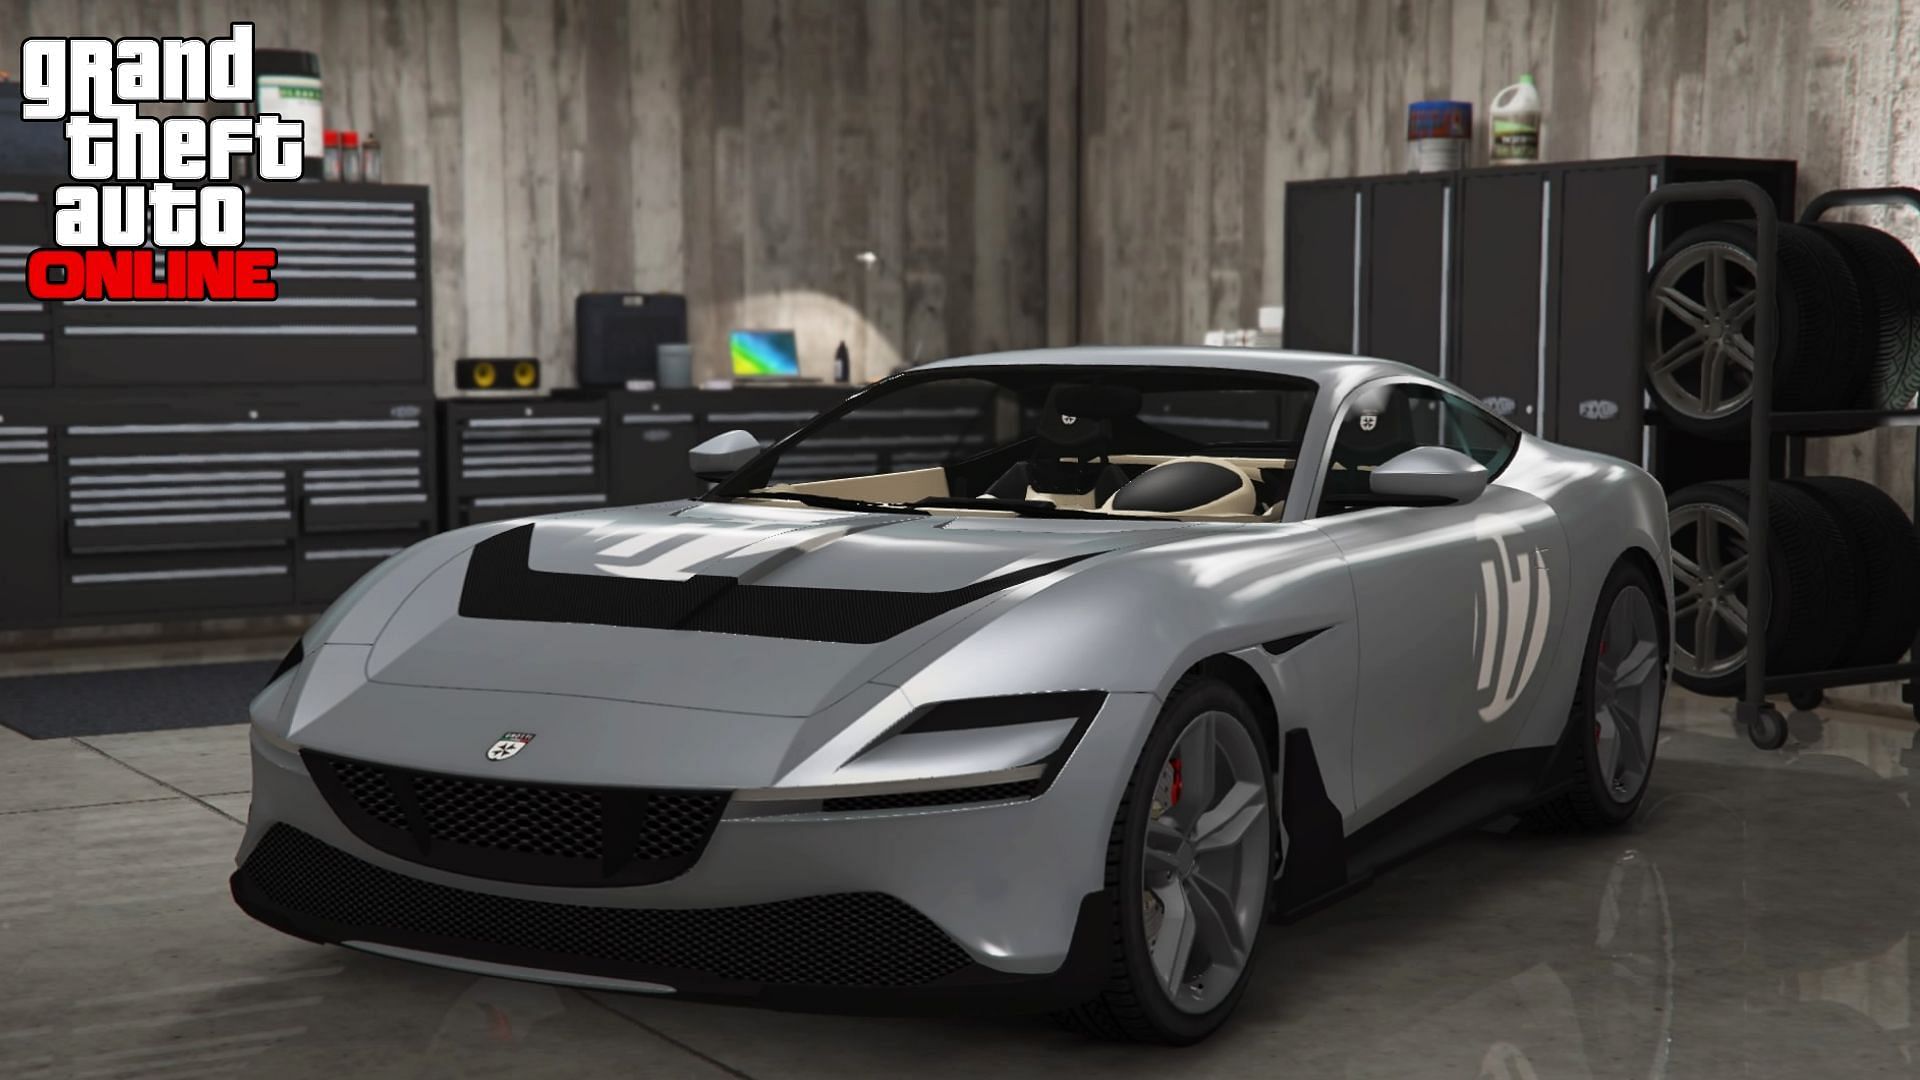 The Grotti Itali GTO Stinger TT is one of the fastest cars in GTA Online (Image via GTA Forums/ForDer089)